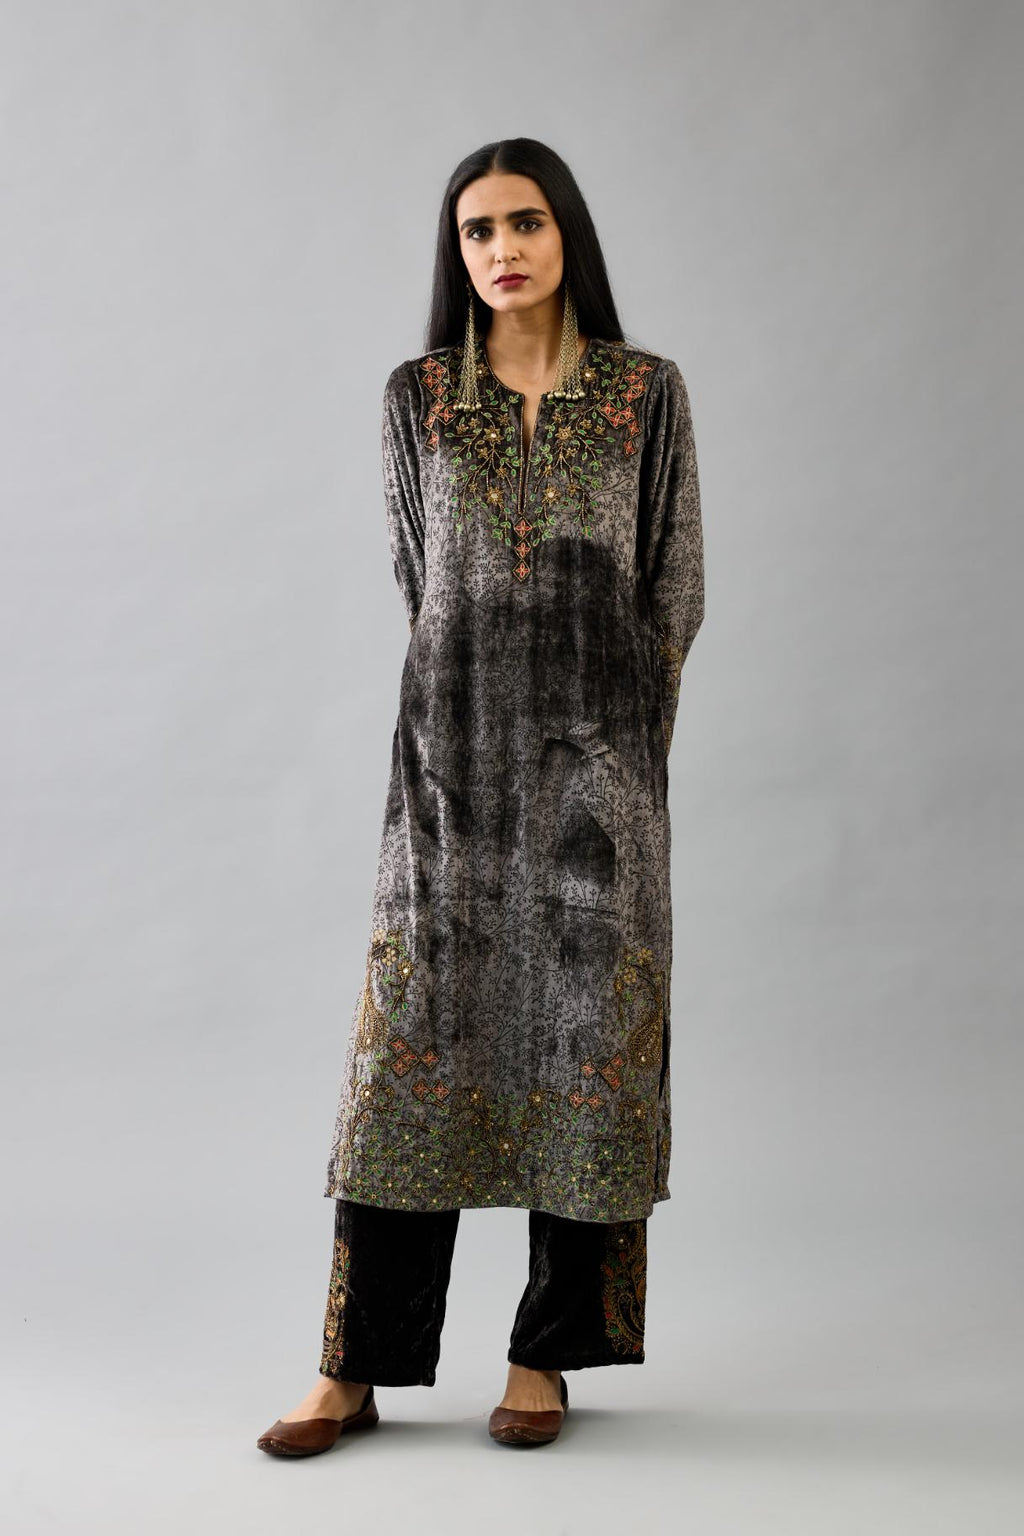 Grey silk velvet straight mid length kurta with all-over hand block print, highlighted with beads, sequins and zari work at neck & hem.